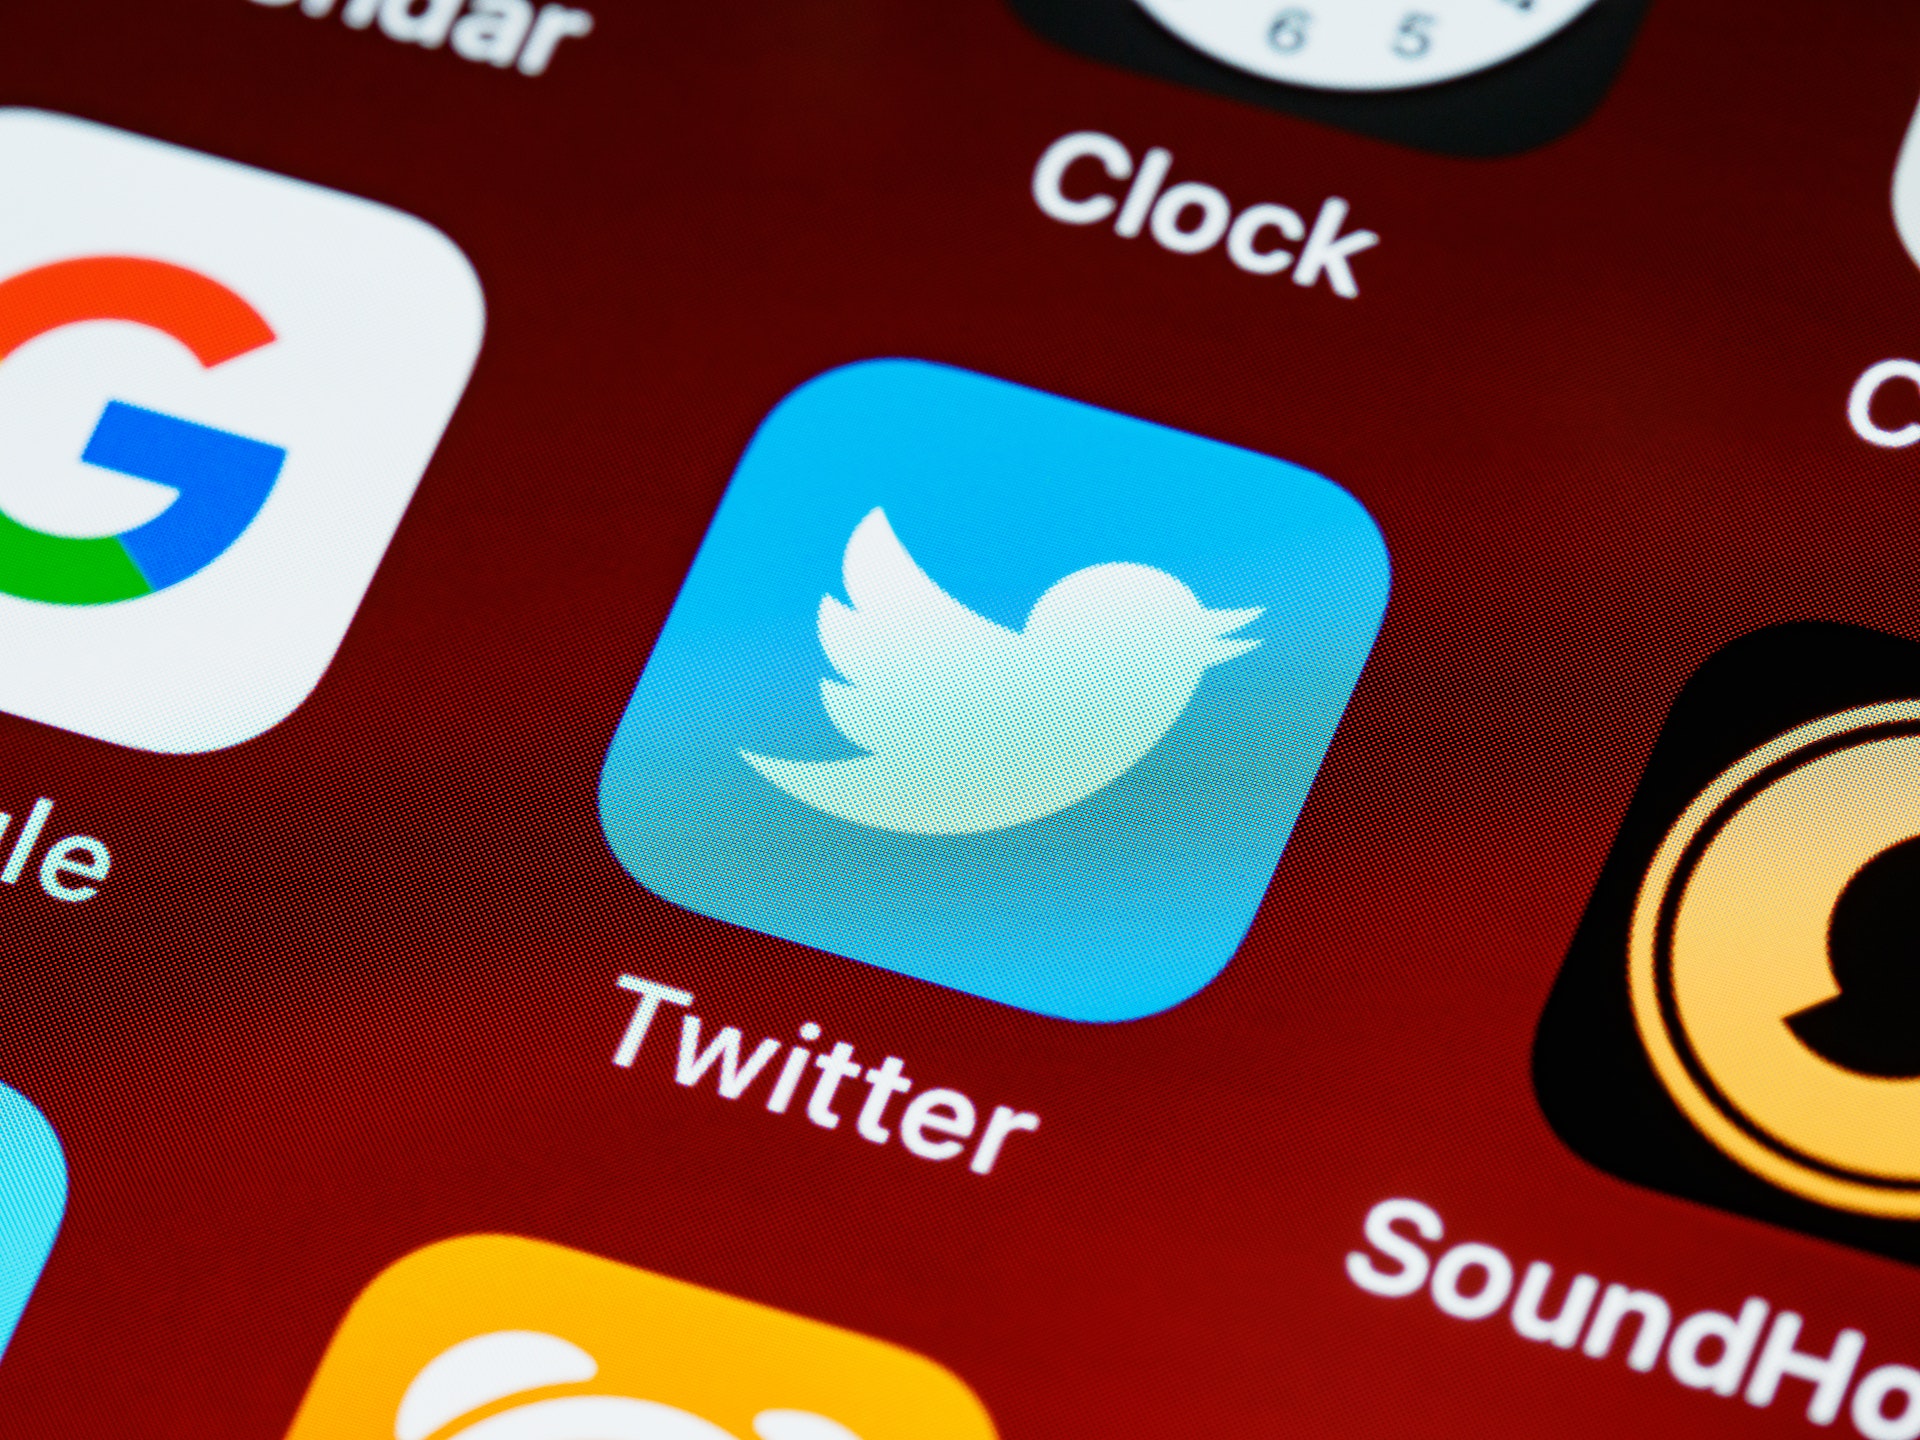 A close-up of Twitter, among other social media apps